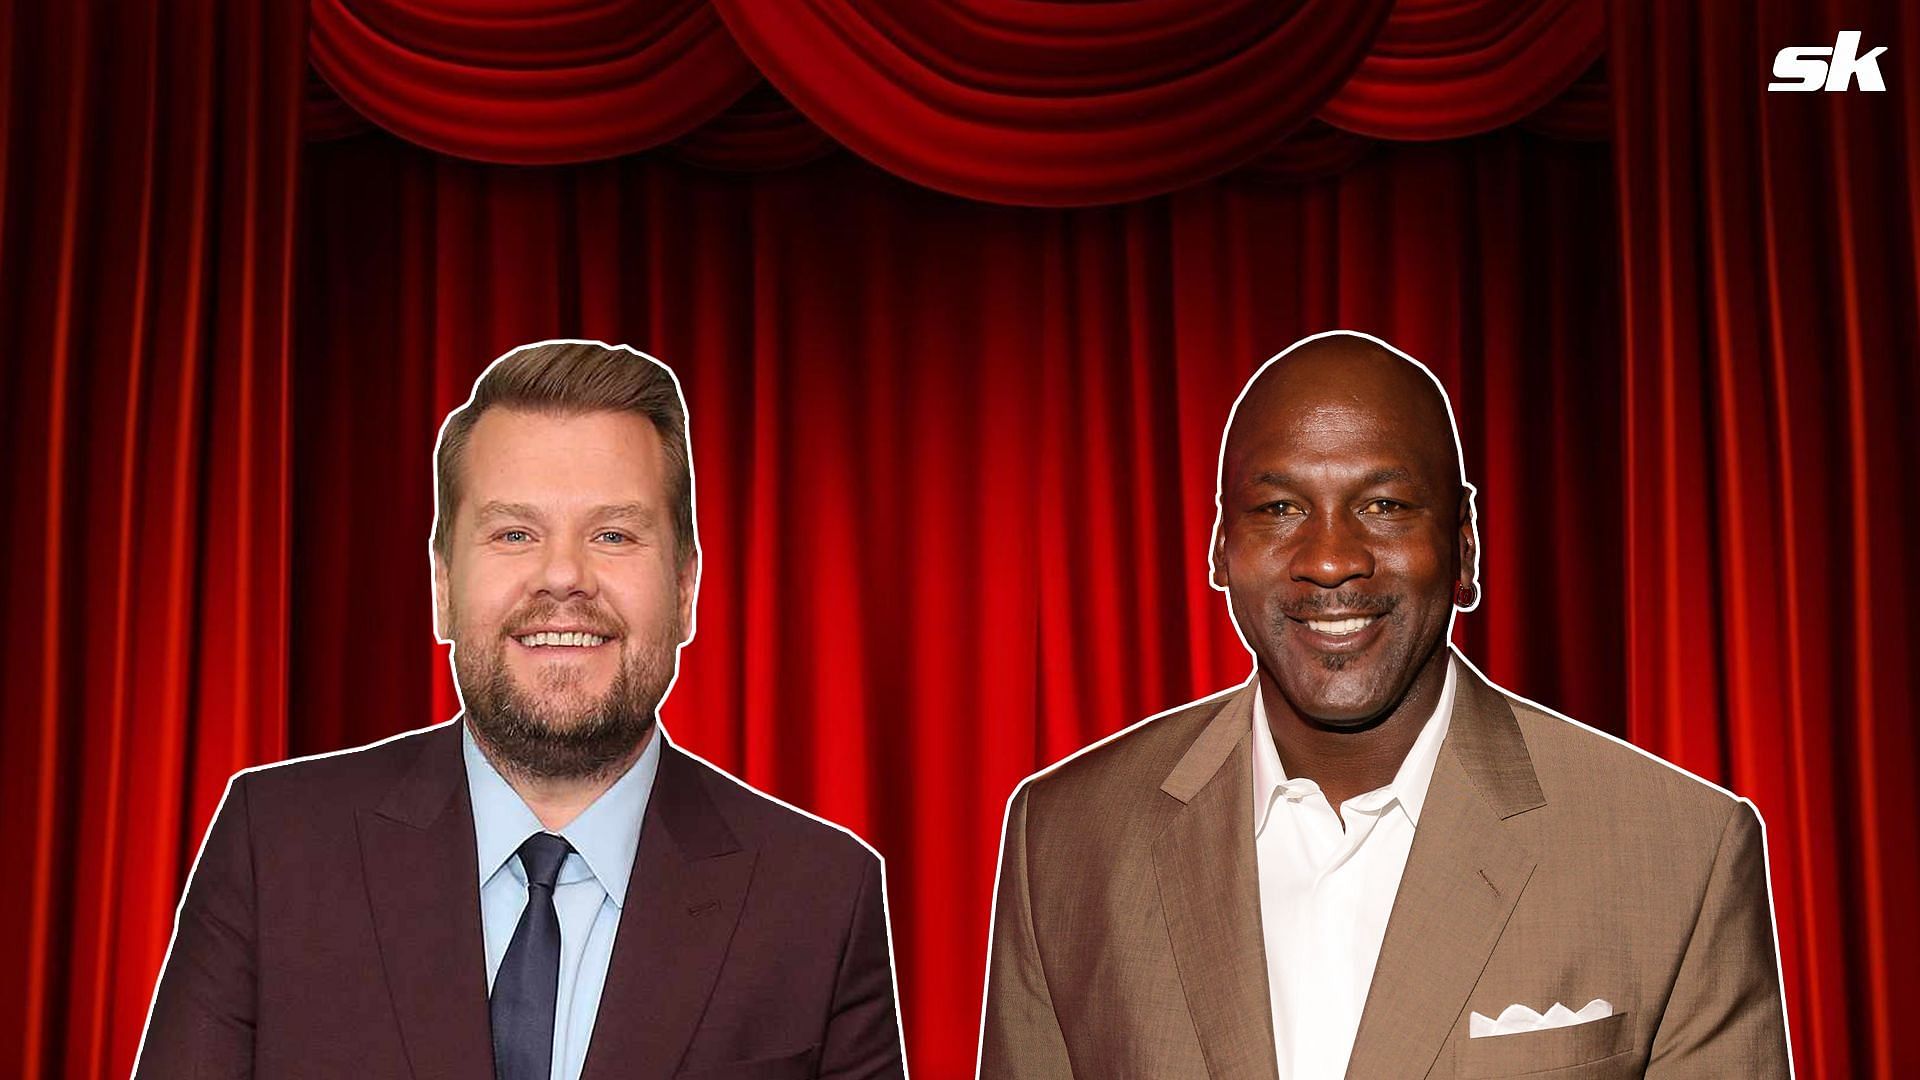 James Corden worked Michael Jordan into a joke at the expense of the game of baseball